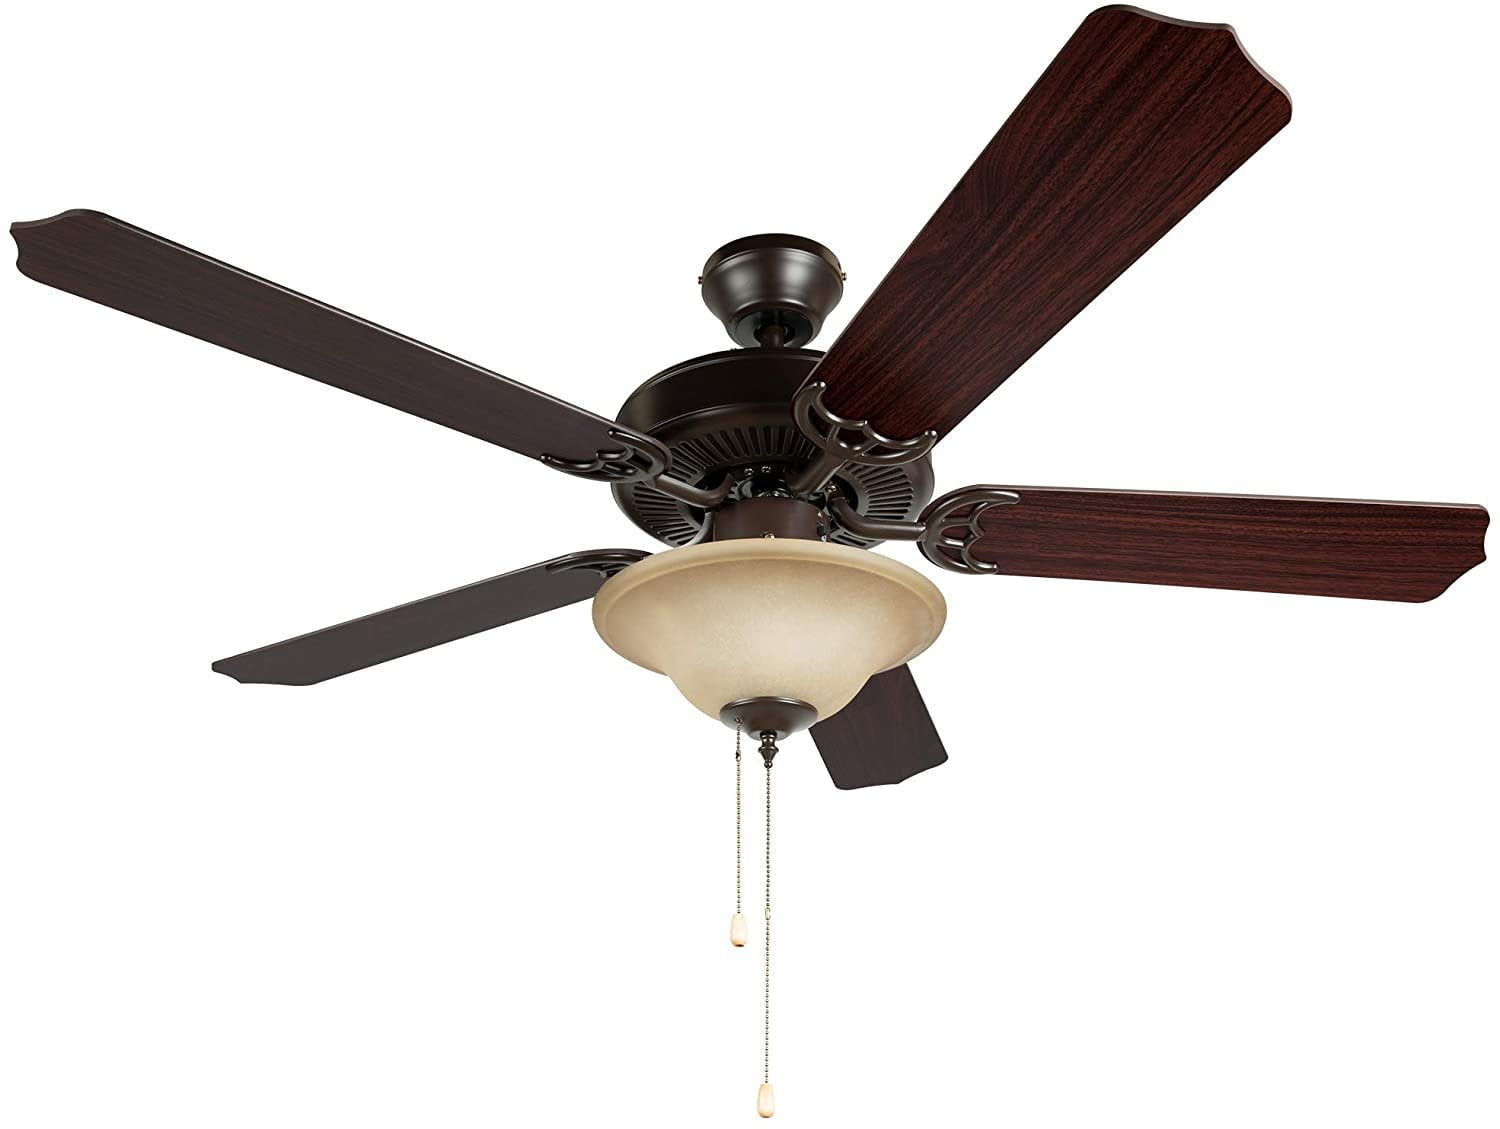 Hyperikon 52 Inch Ceiling Fan 60W Controlled with Remote and Pull Chain,